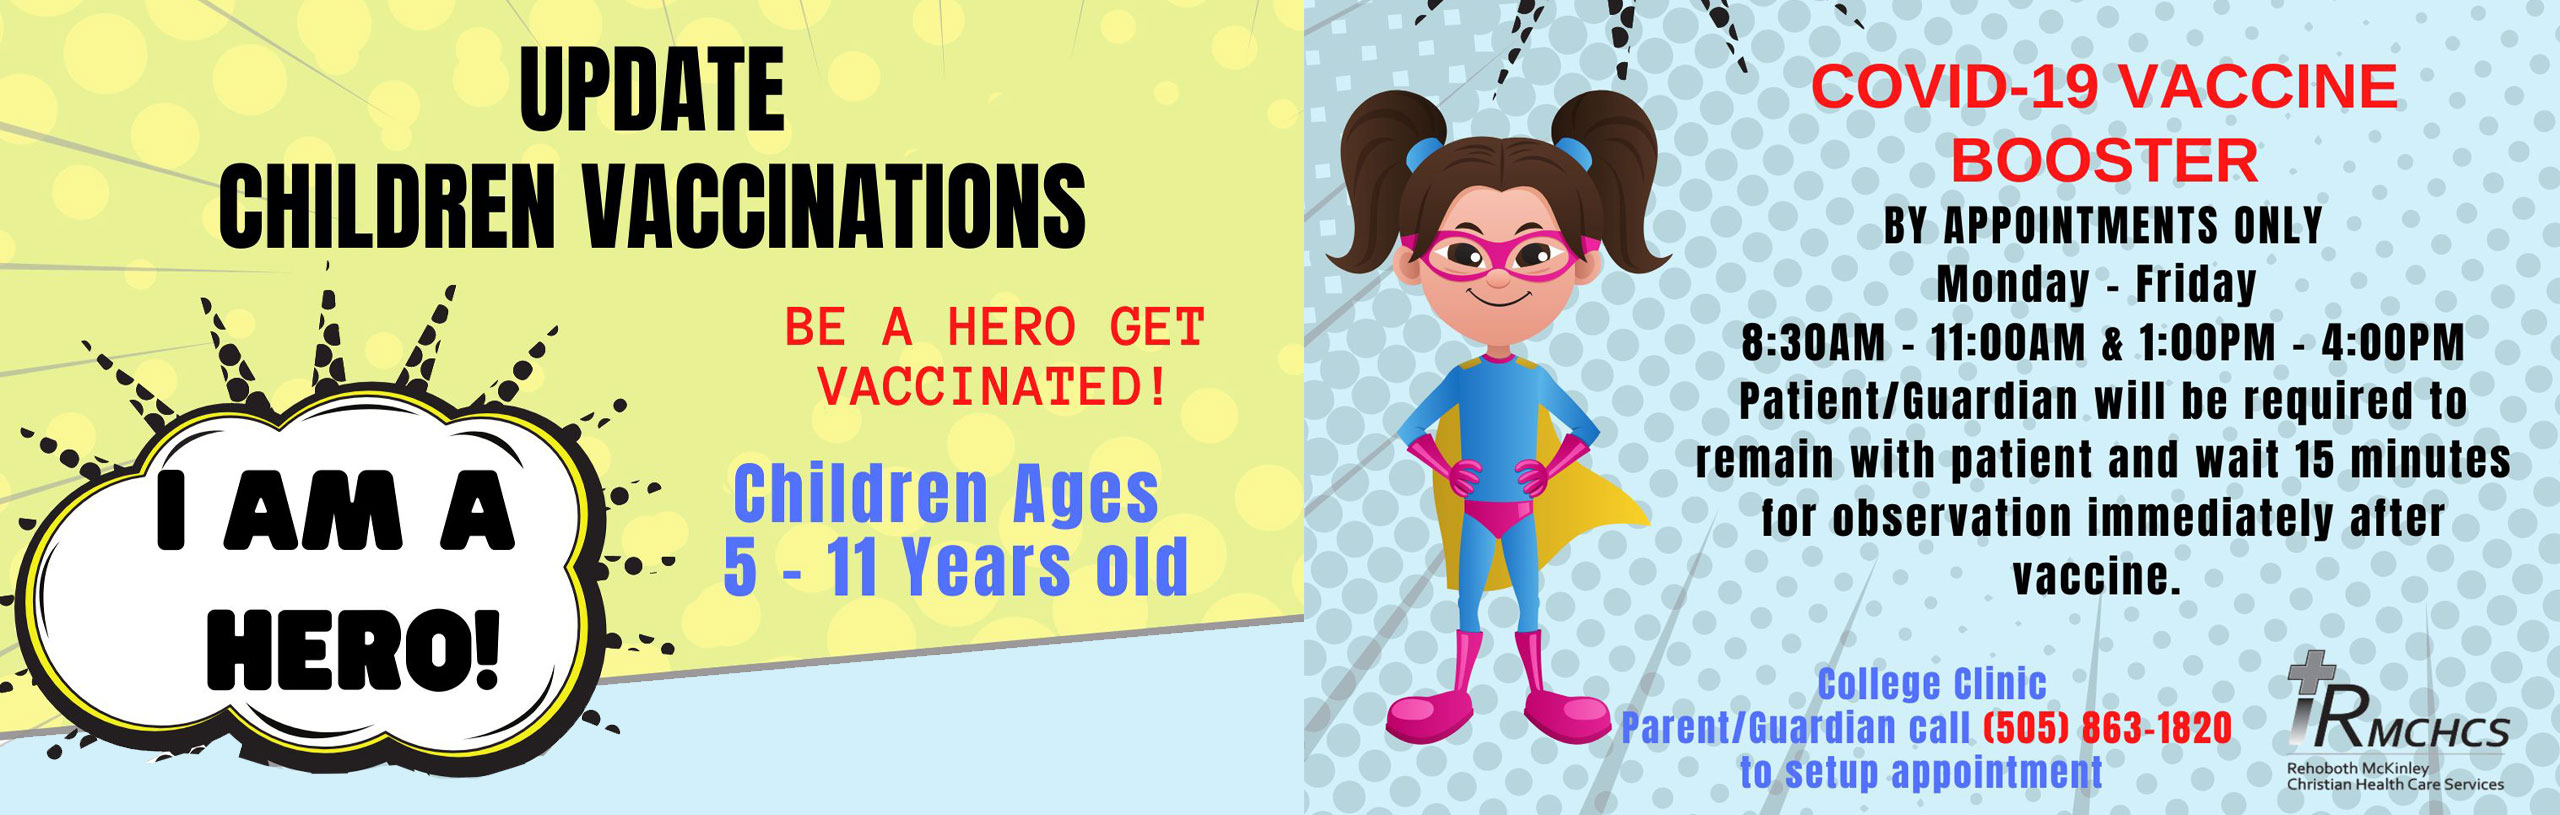 Banner Graphic of a little girl that is wearing superhero wear. She has on glasses, a cape, shorts, boots, and a bodysuit. 

Banner says:

UPDATE CHILDREN VACCINATIONS

BE A HERO GET VACCINATED!

Children Ages 5-11 years old


COVID-19 VACCINE BOOSTER
By appointment only
Monday- Friday
8:30AM- 11:00AM & 1:00PM-4:00PM

Patients/Guardians will be required to remain with patient and wait 15 minutes for observation immediately after vaccine

College Clinic
Parent/Guardian call (505) 863-1820 to set up appointment

+RMCHCS
Rehoboth Mckinley Christian Care Services